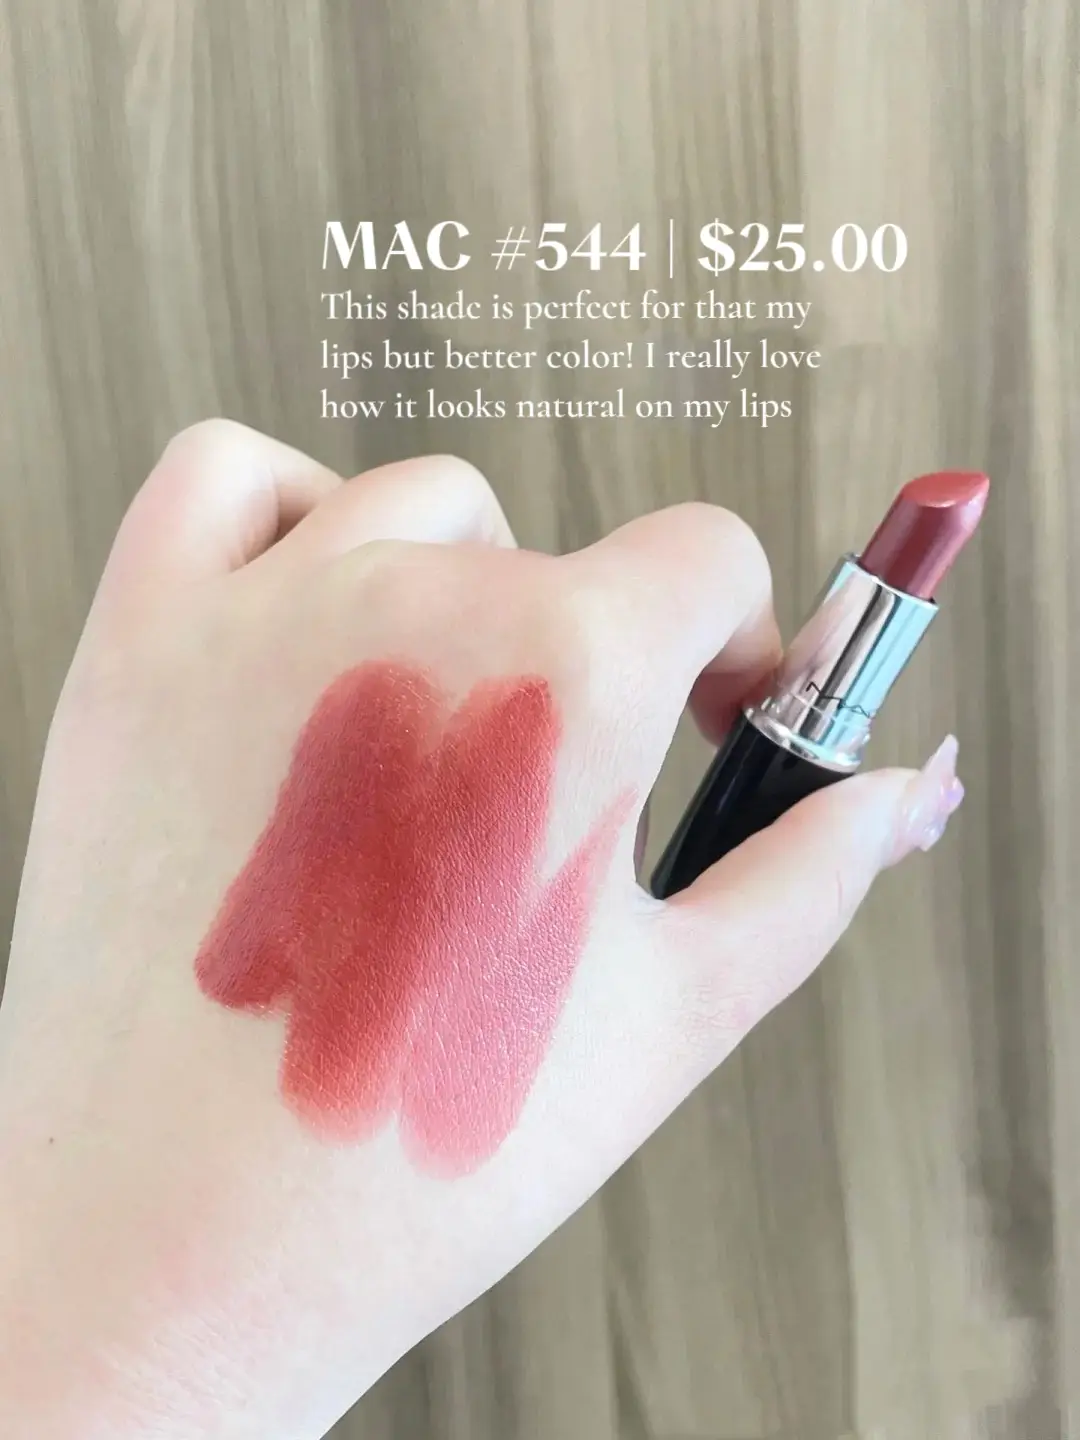 MAC Matte Lipstick in Velvet Teddy, 9 Fall Lipstick Shades Our Editors Are  Loving This Fall, From Dusty Roses to Deep Browns